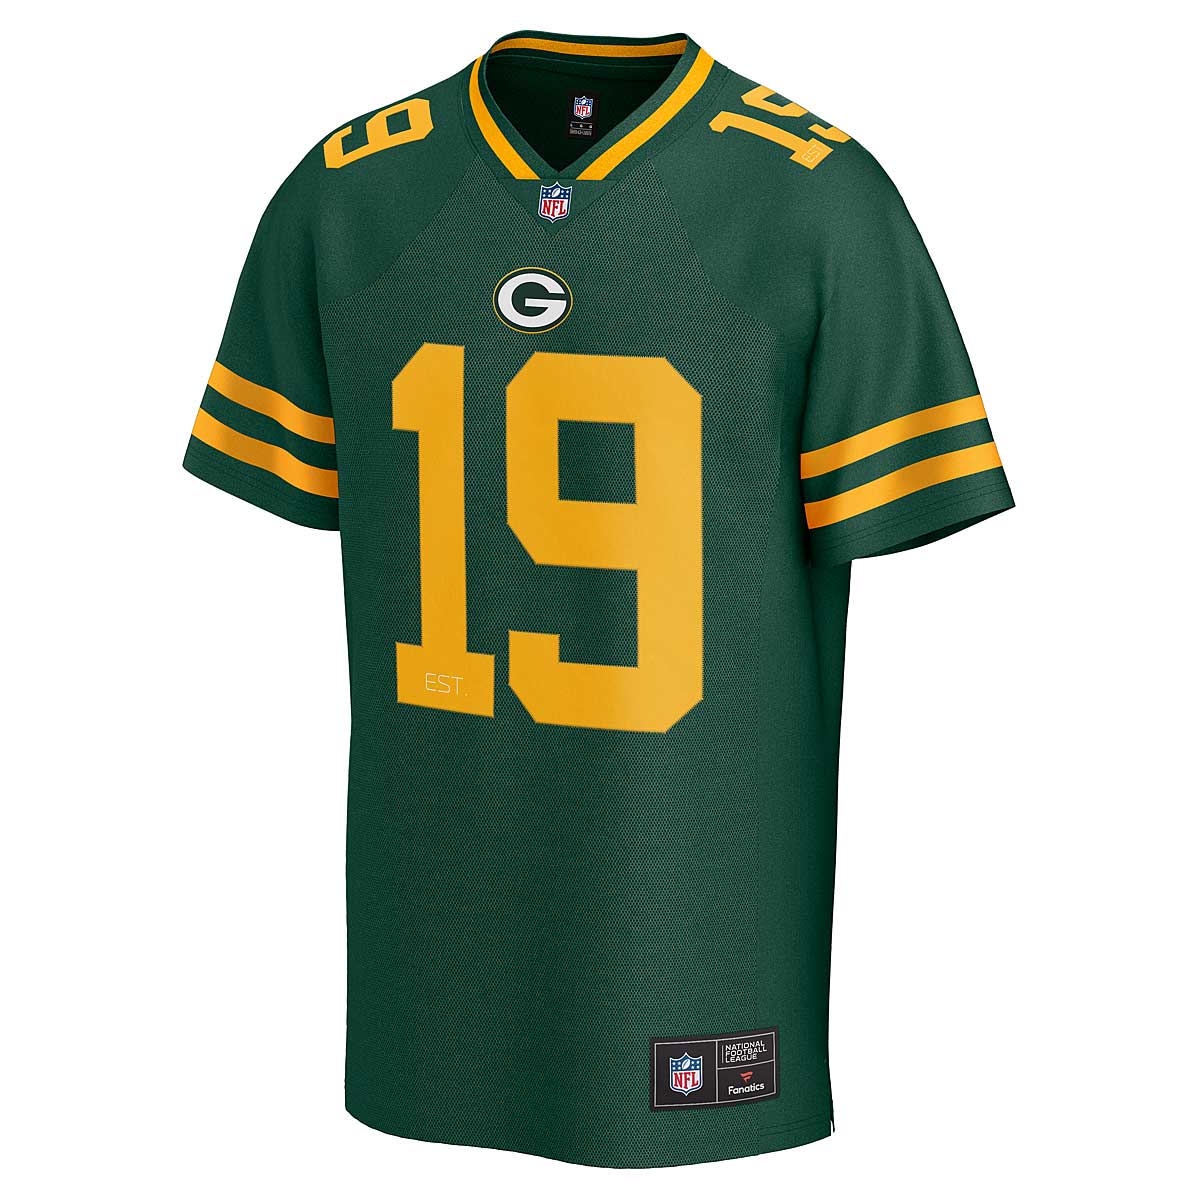 Image of Nike NFL Core Franchise Jersey Green Bay Packers, Dark Green/yellow Gold/dark Green/dark Green/yellow Gold